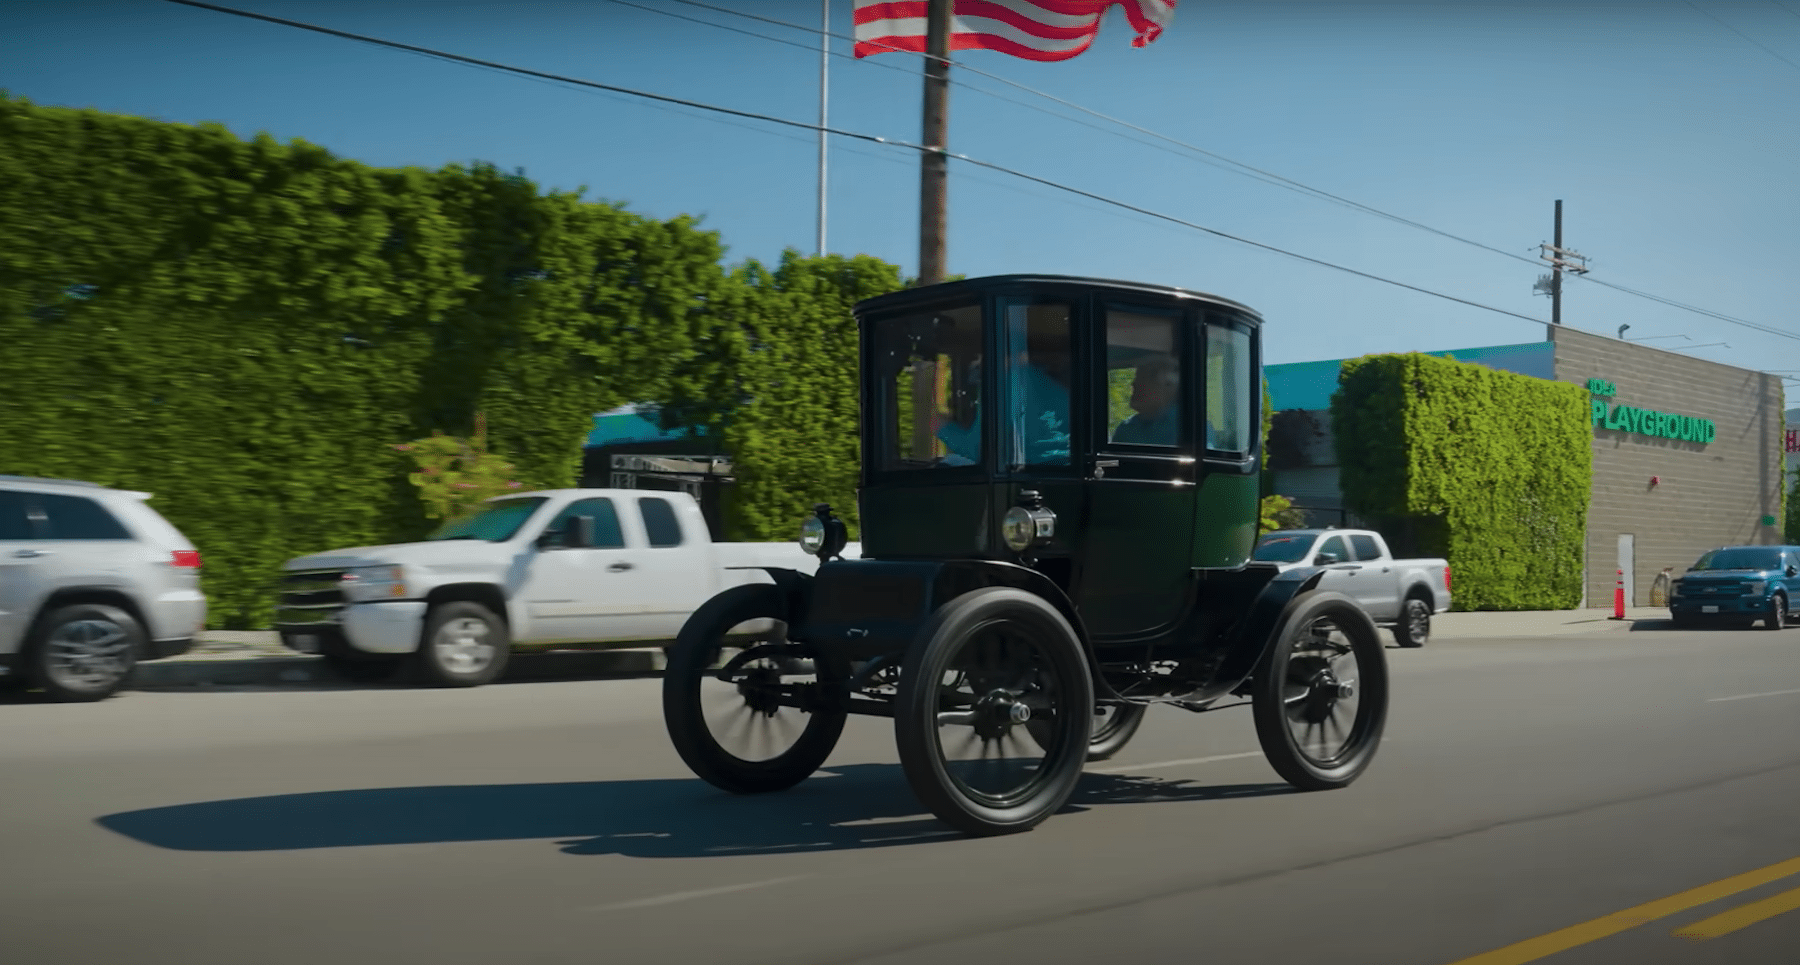 The 100-year old EV